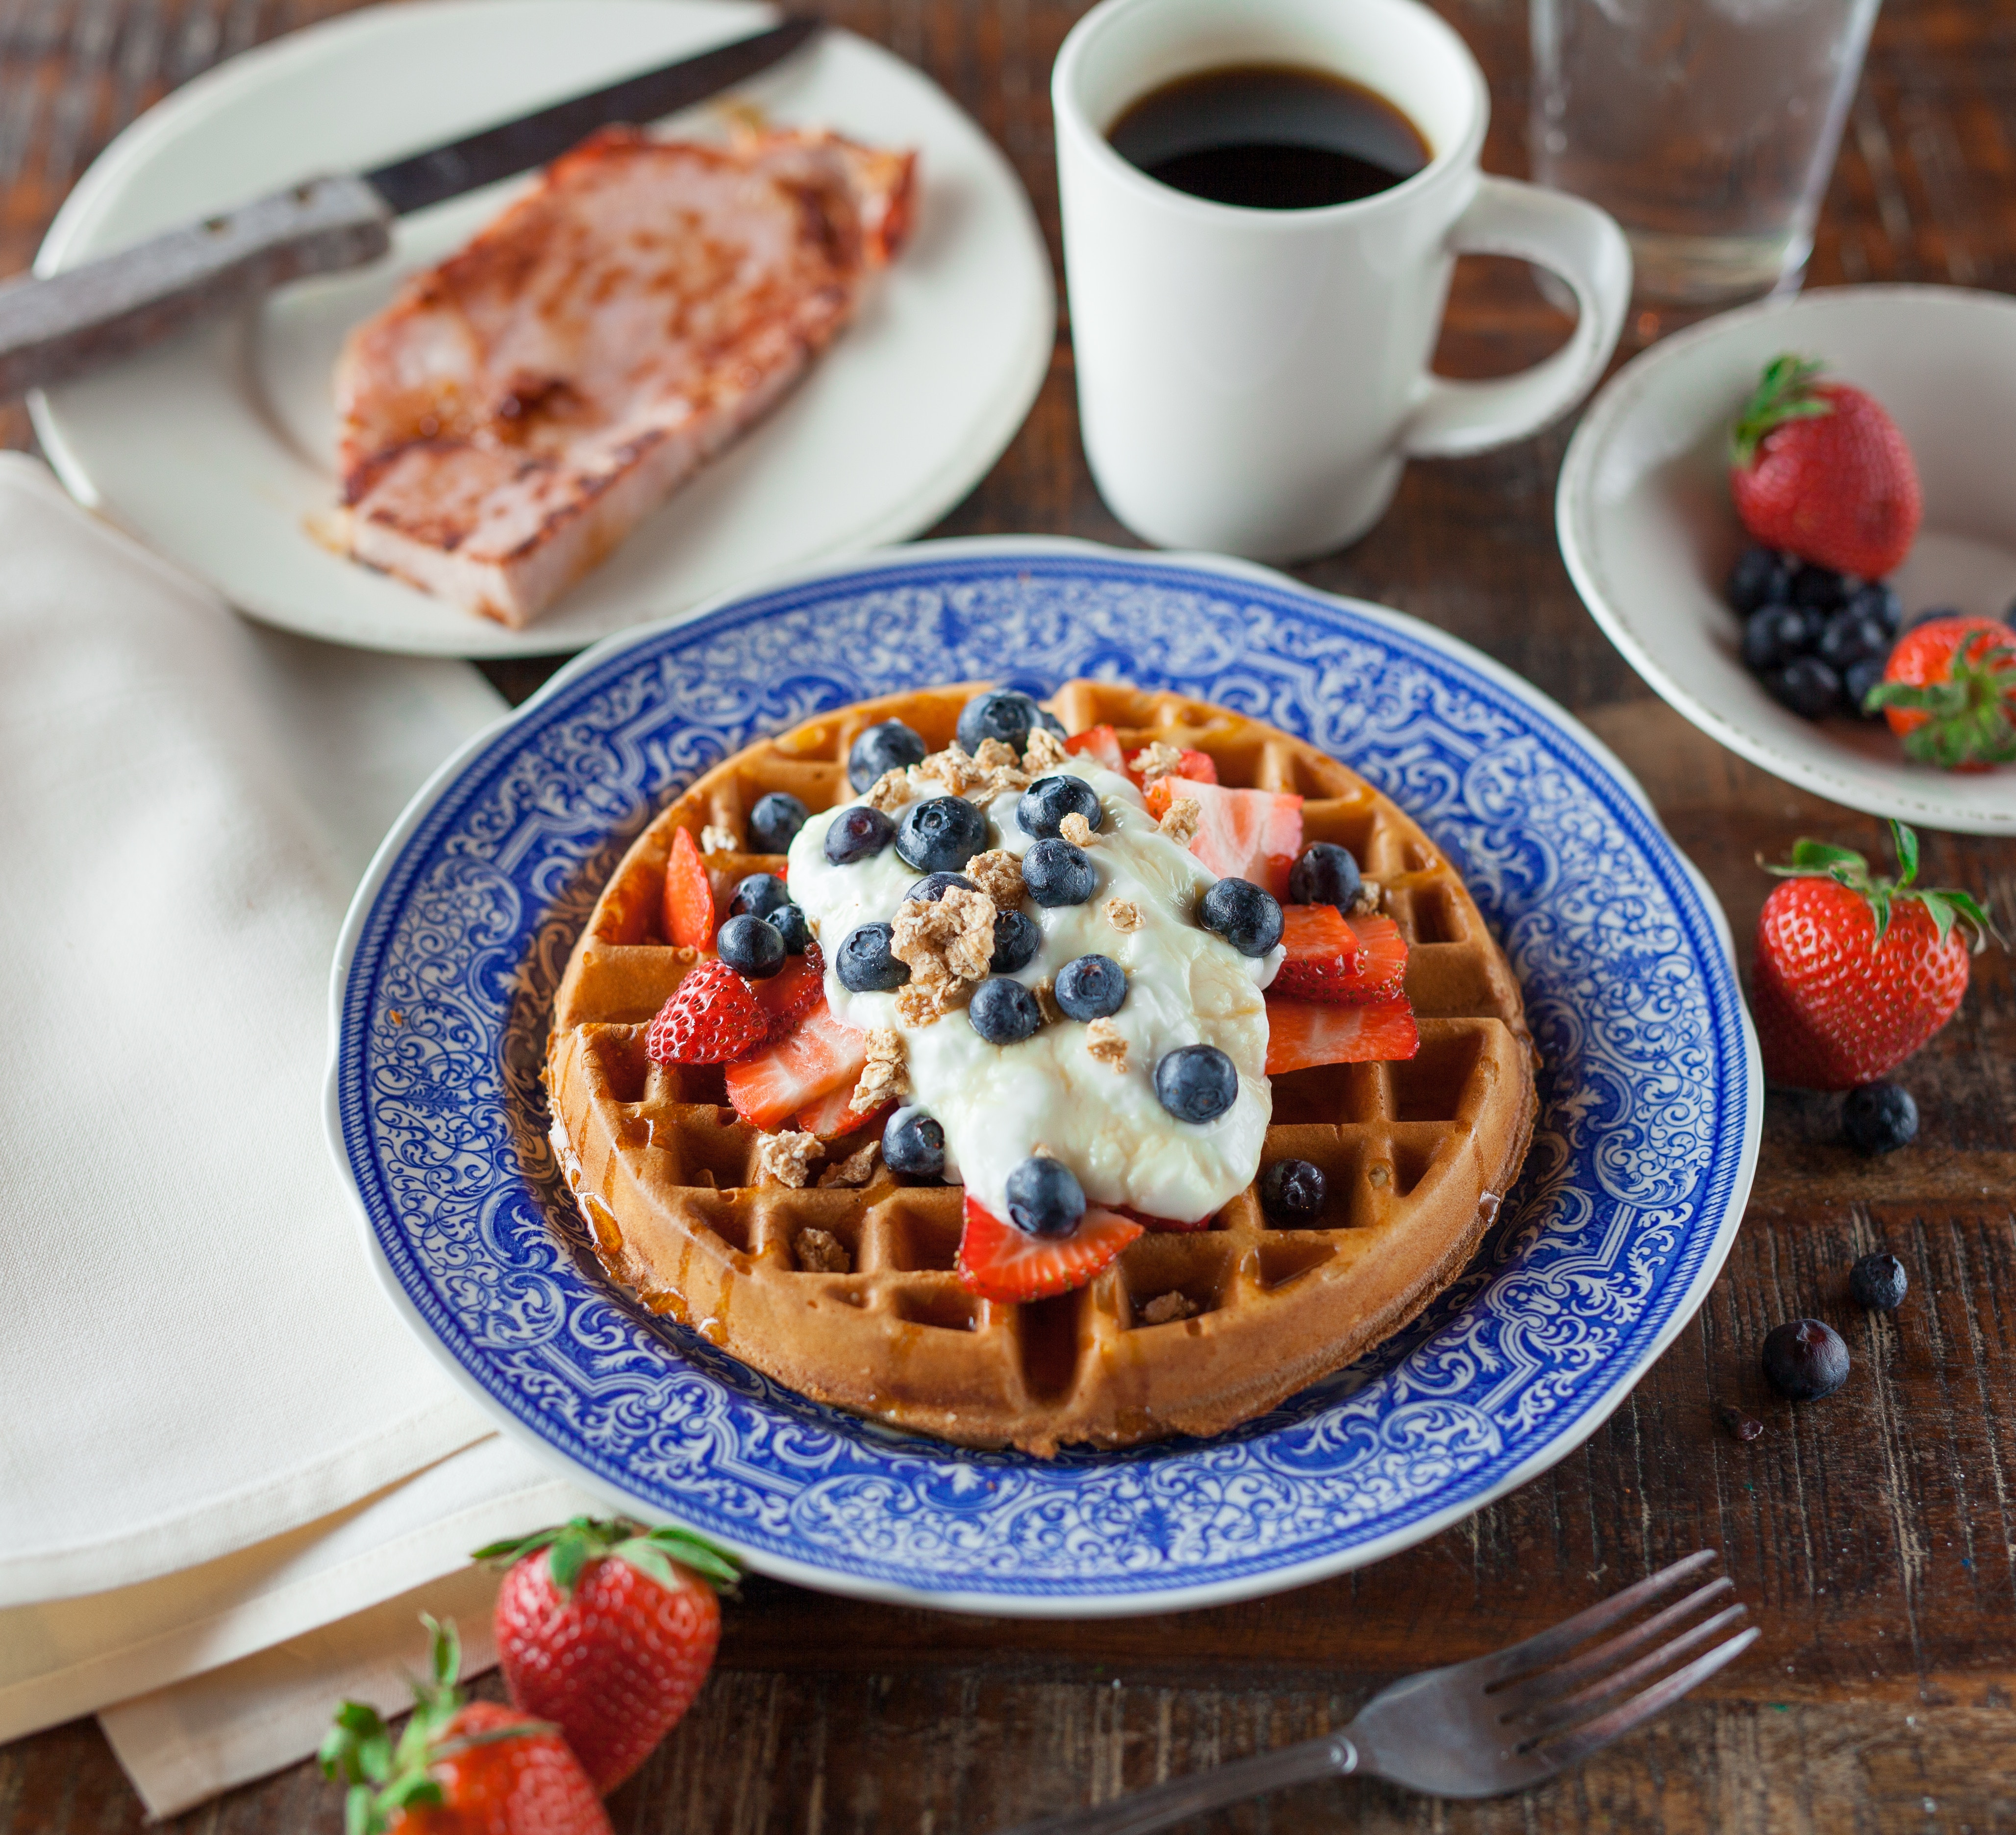 Waffles Coffee Plates Strawberries Blueberries Food Fork Table Knife Wooden Surface 4113x3744